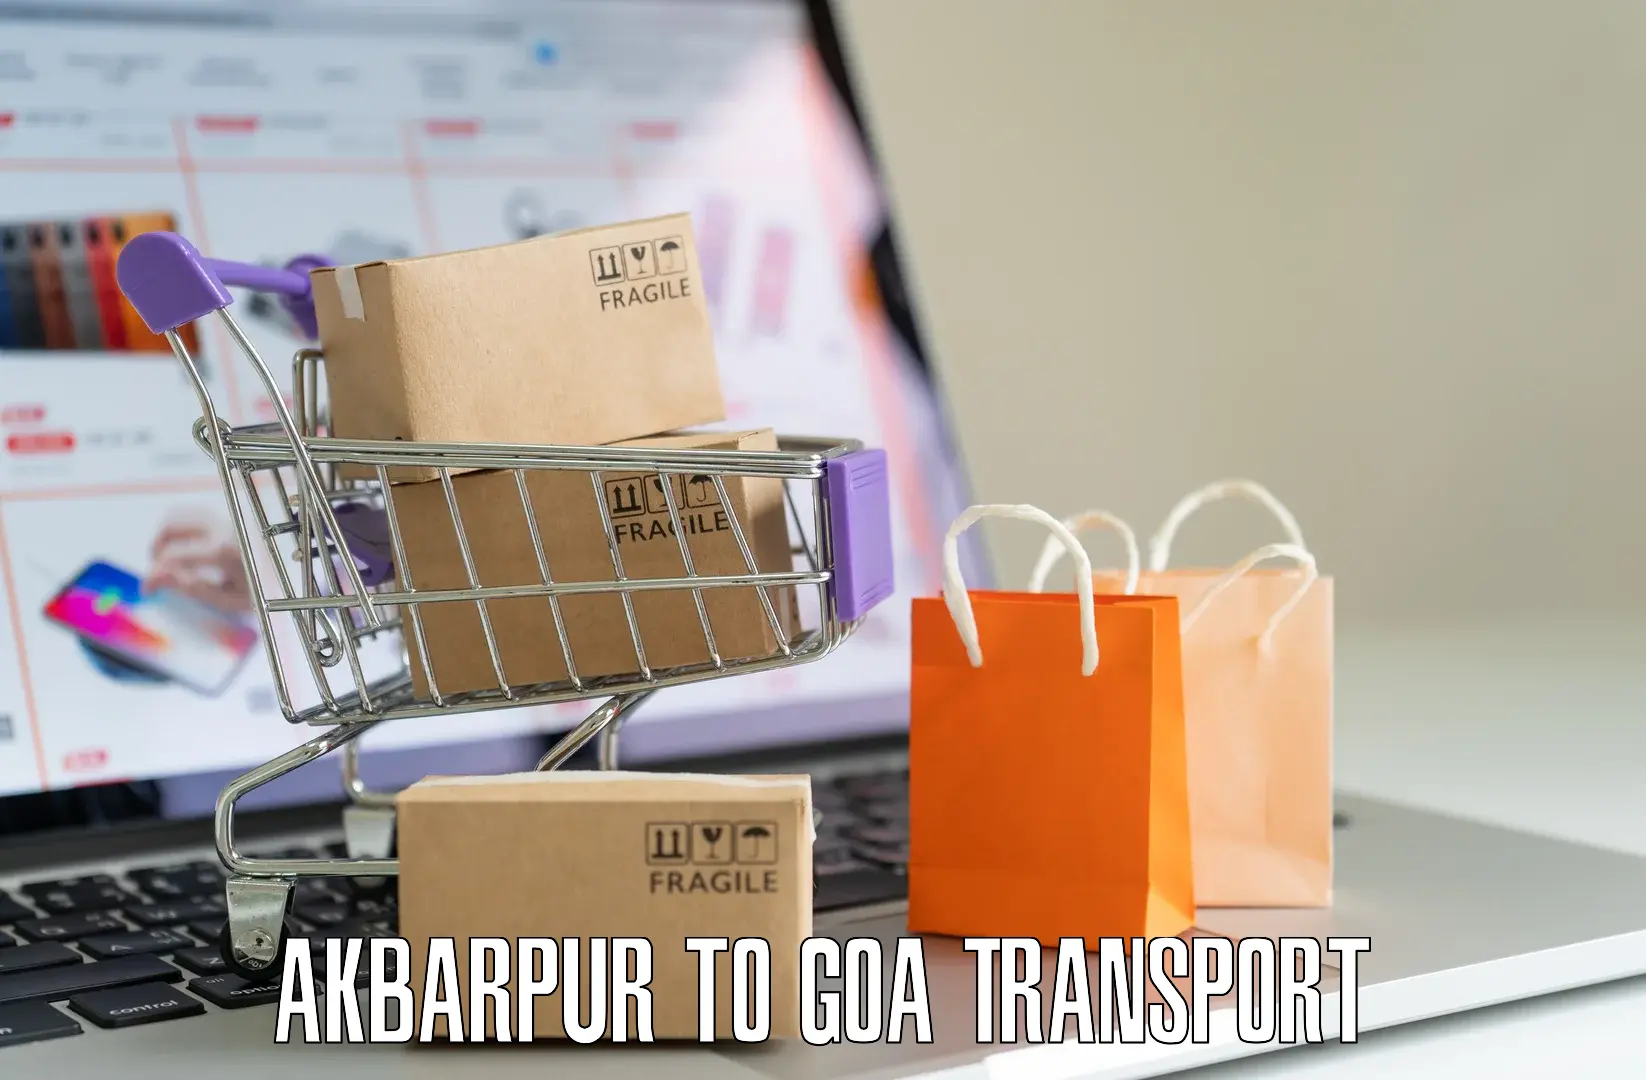 Transport bike from one state to another Akbarpur to IIT Goa